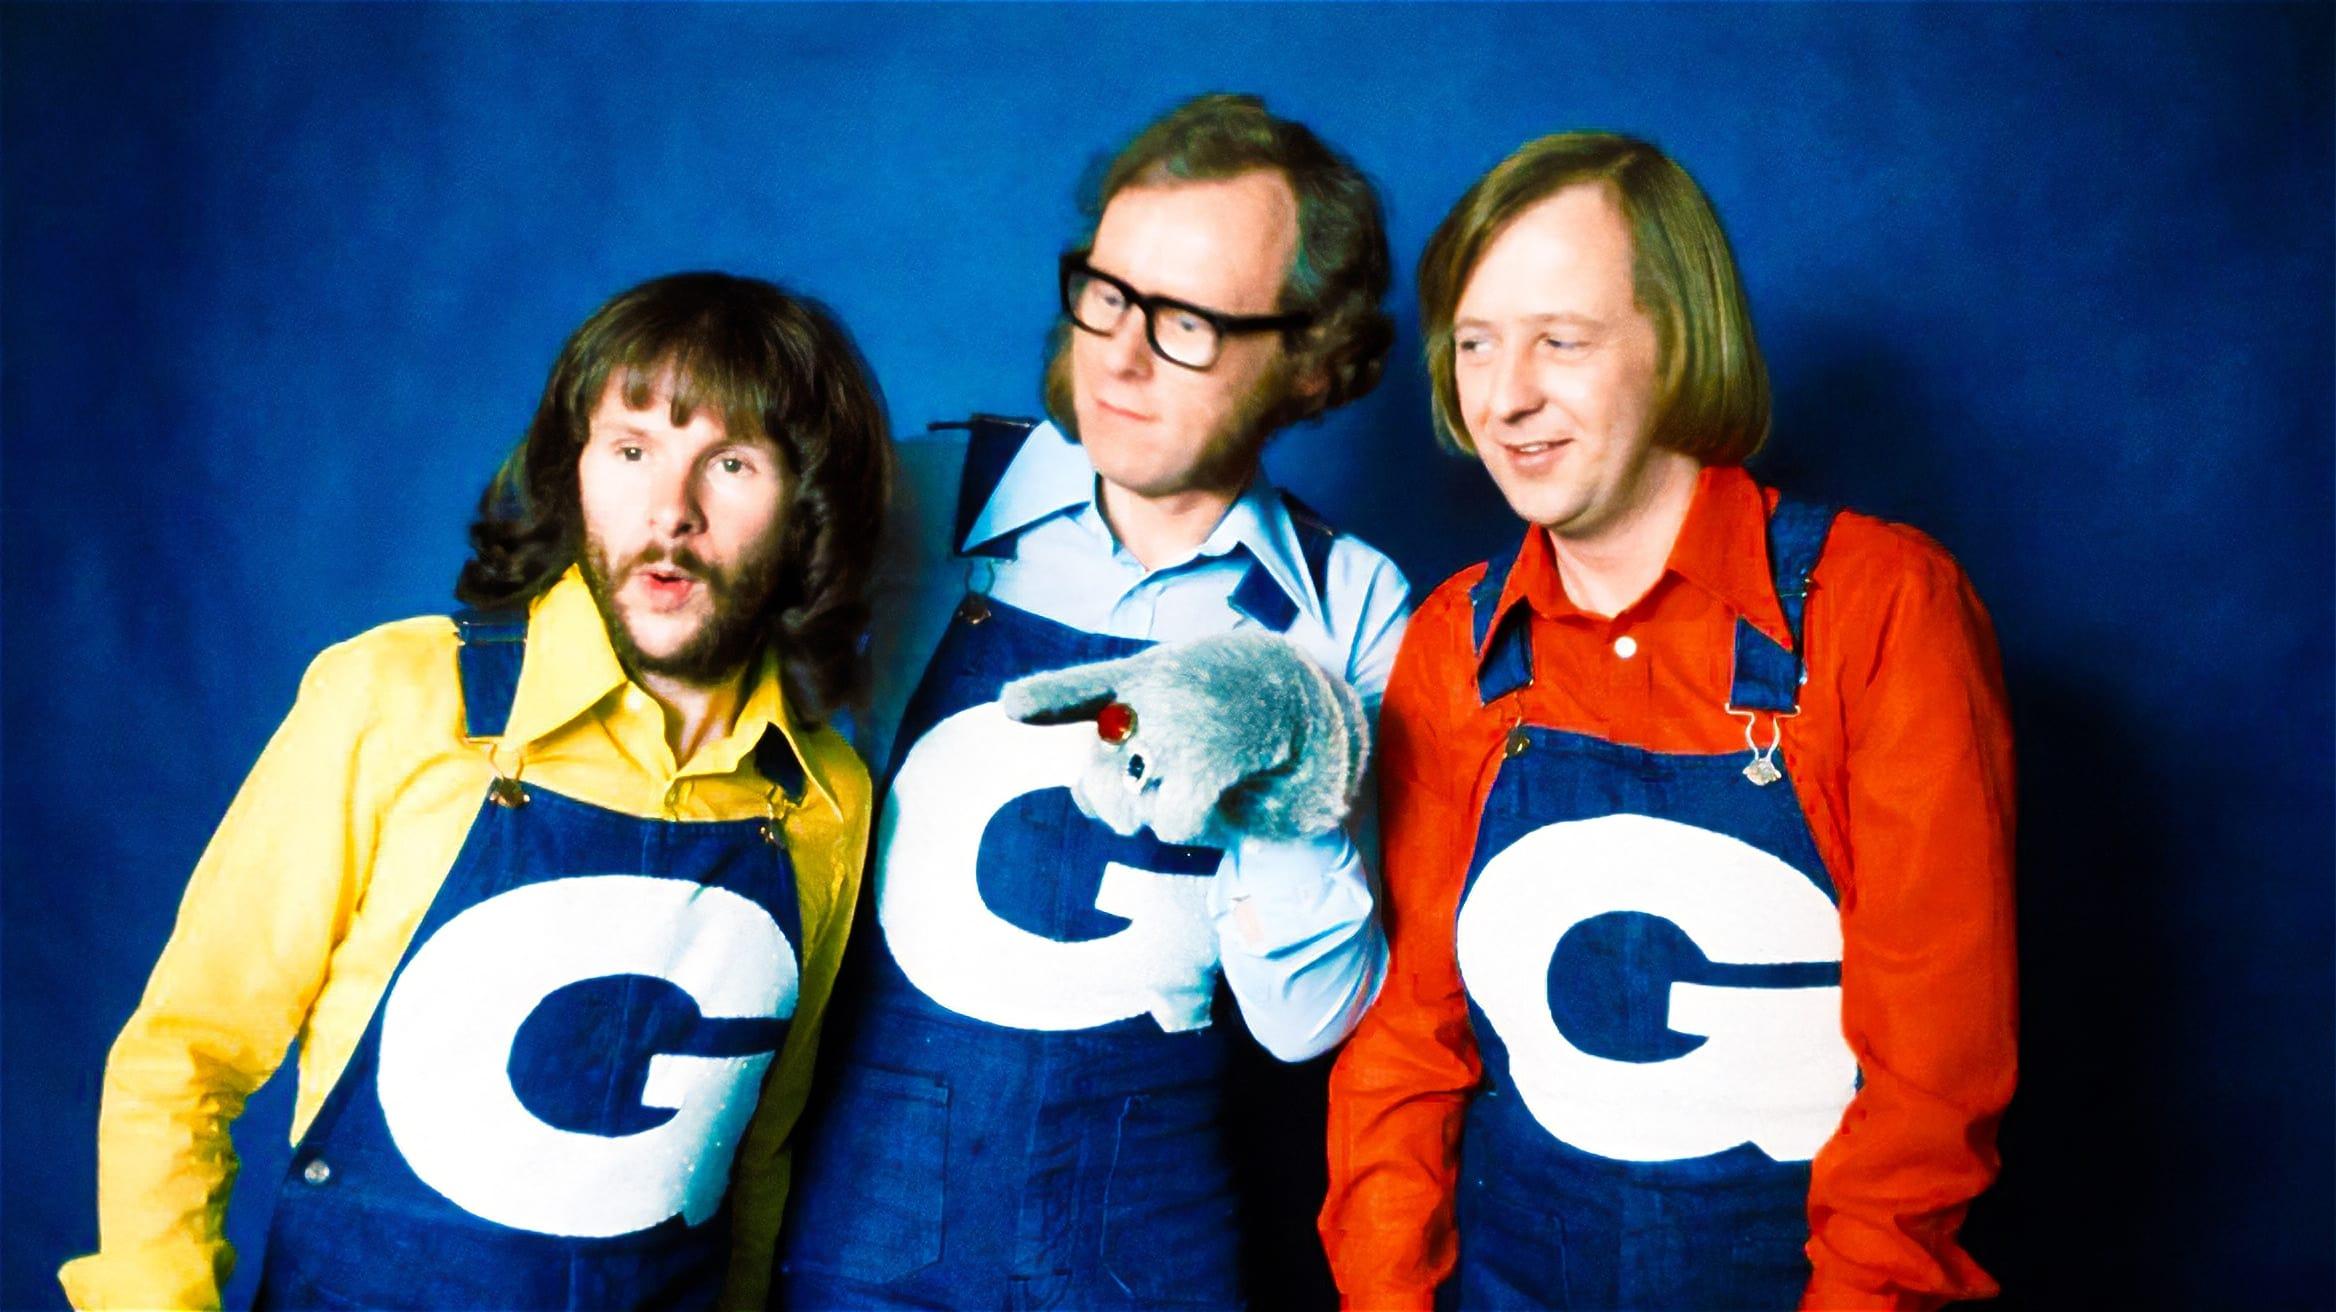 The Goodies Almost Live backdrop